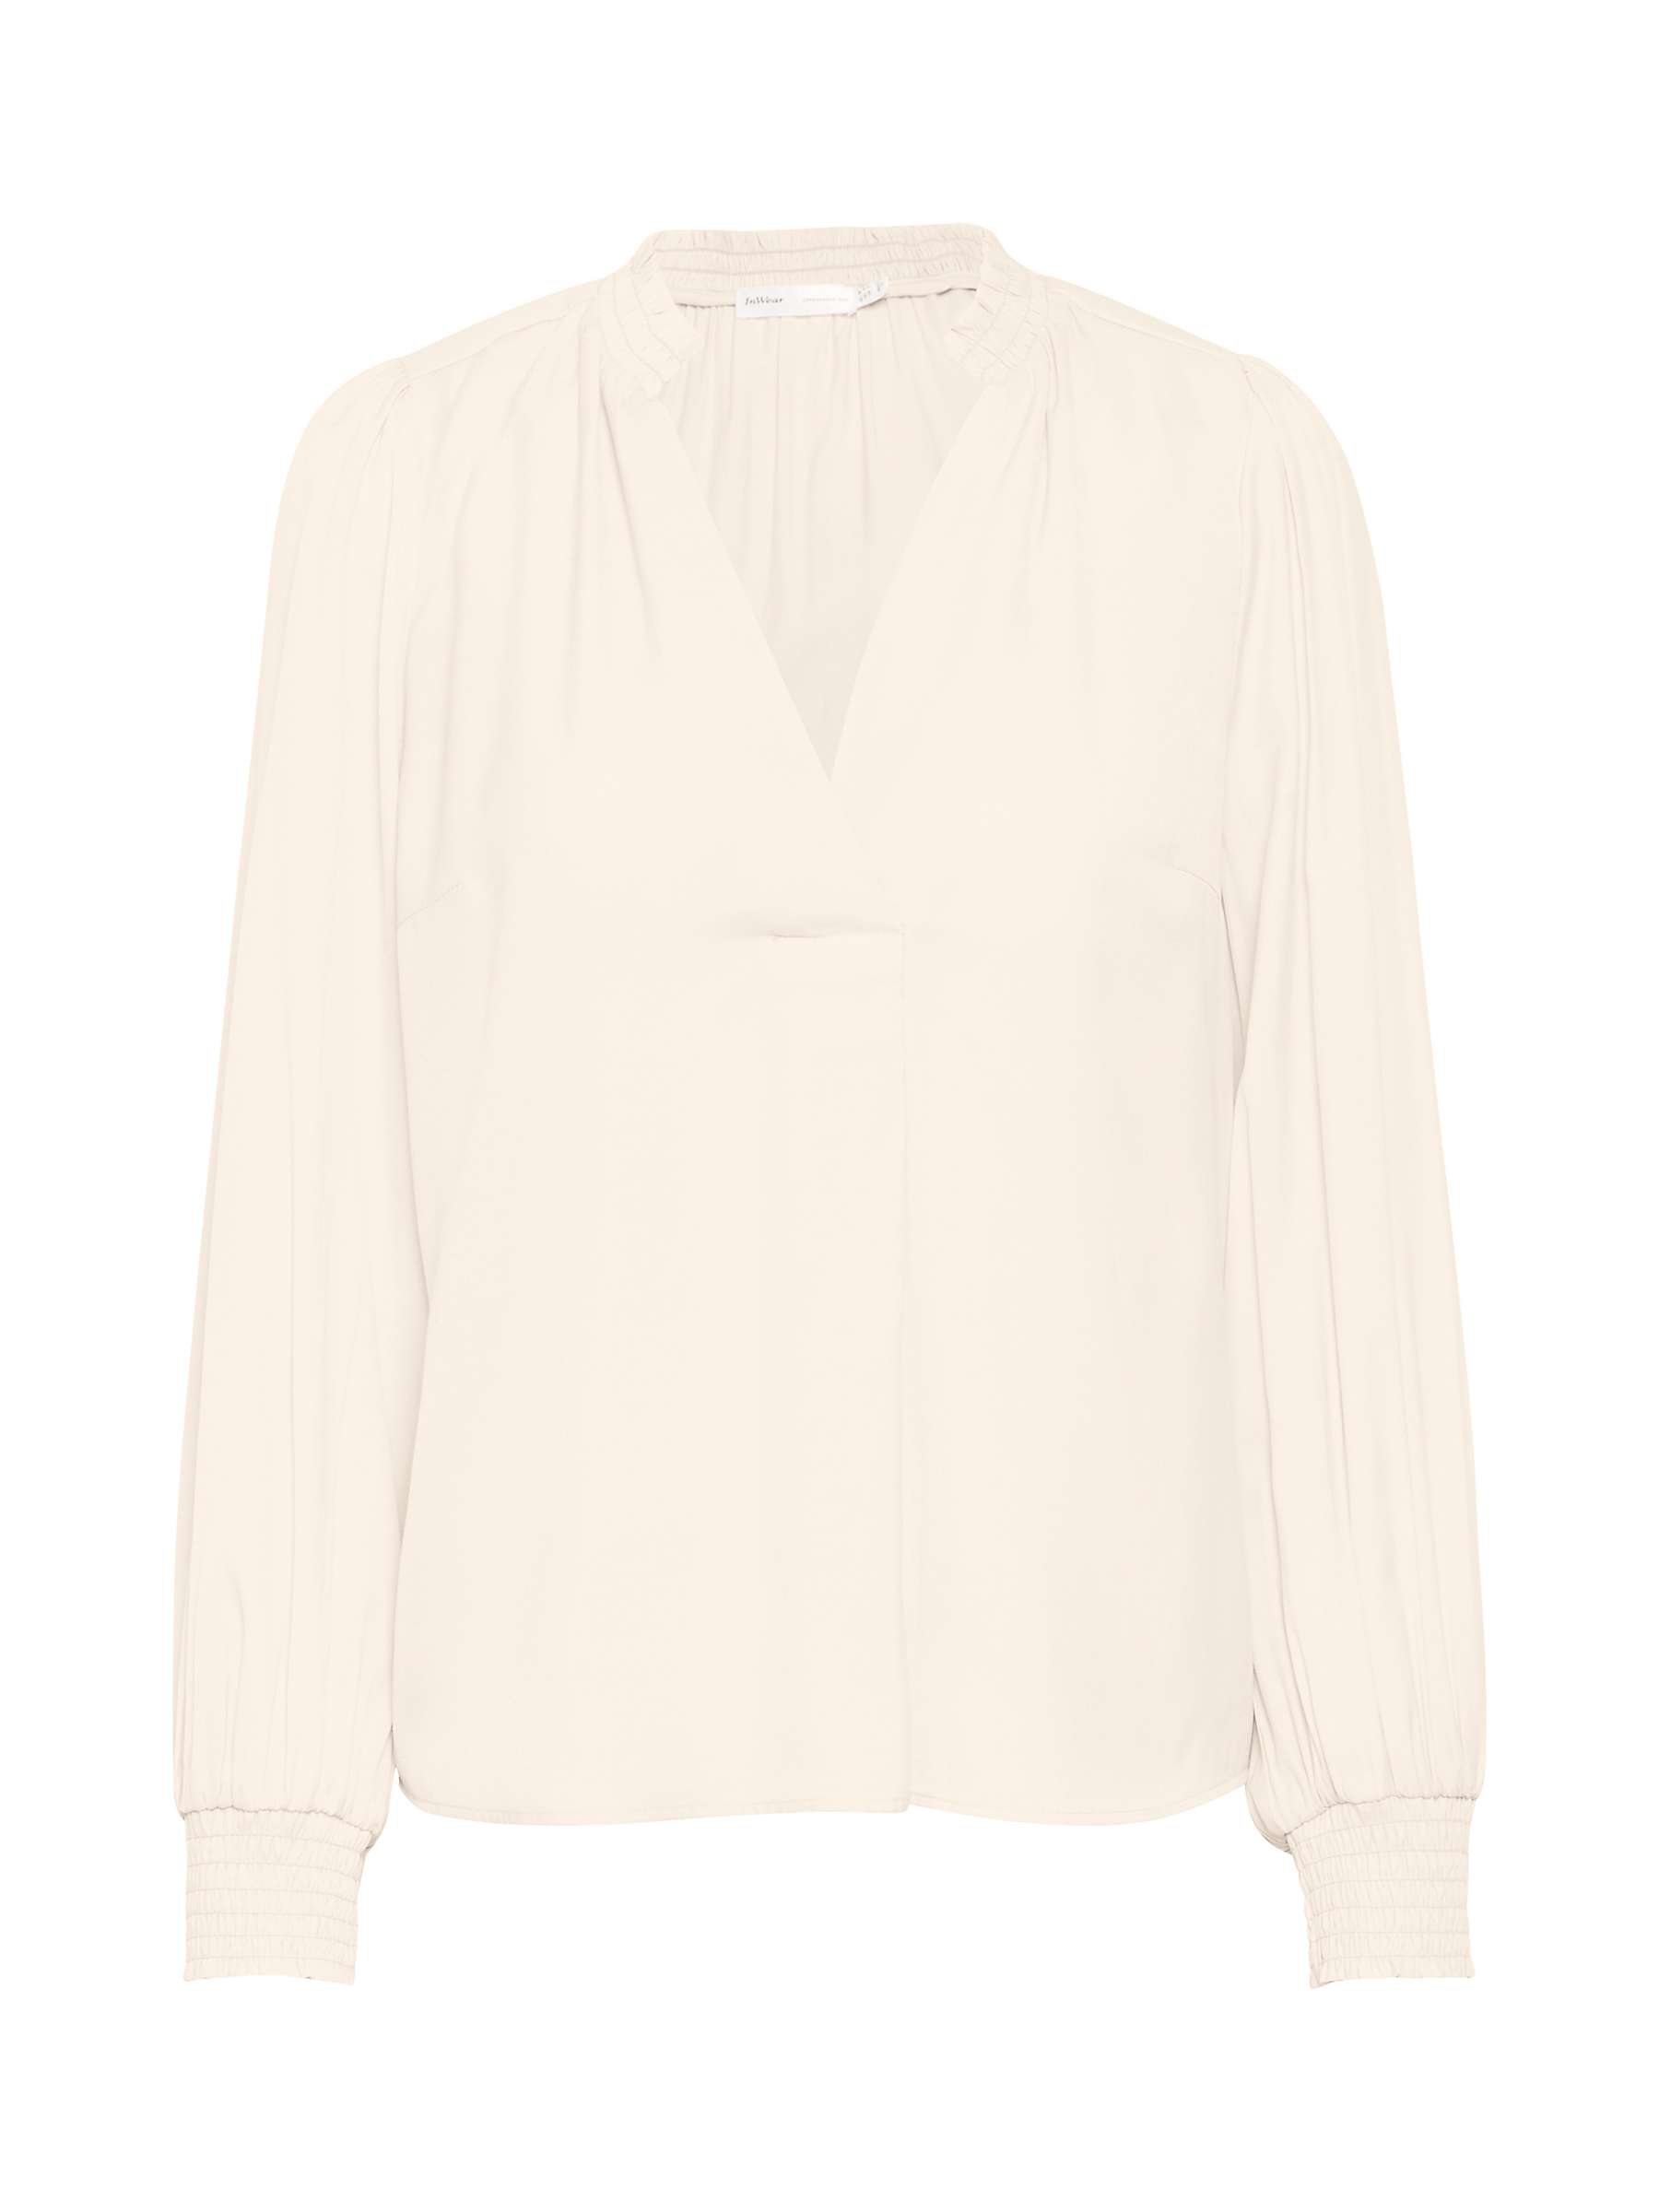 Buy InWear Huxie Blouse Online at johnlewis.com